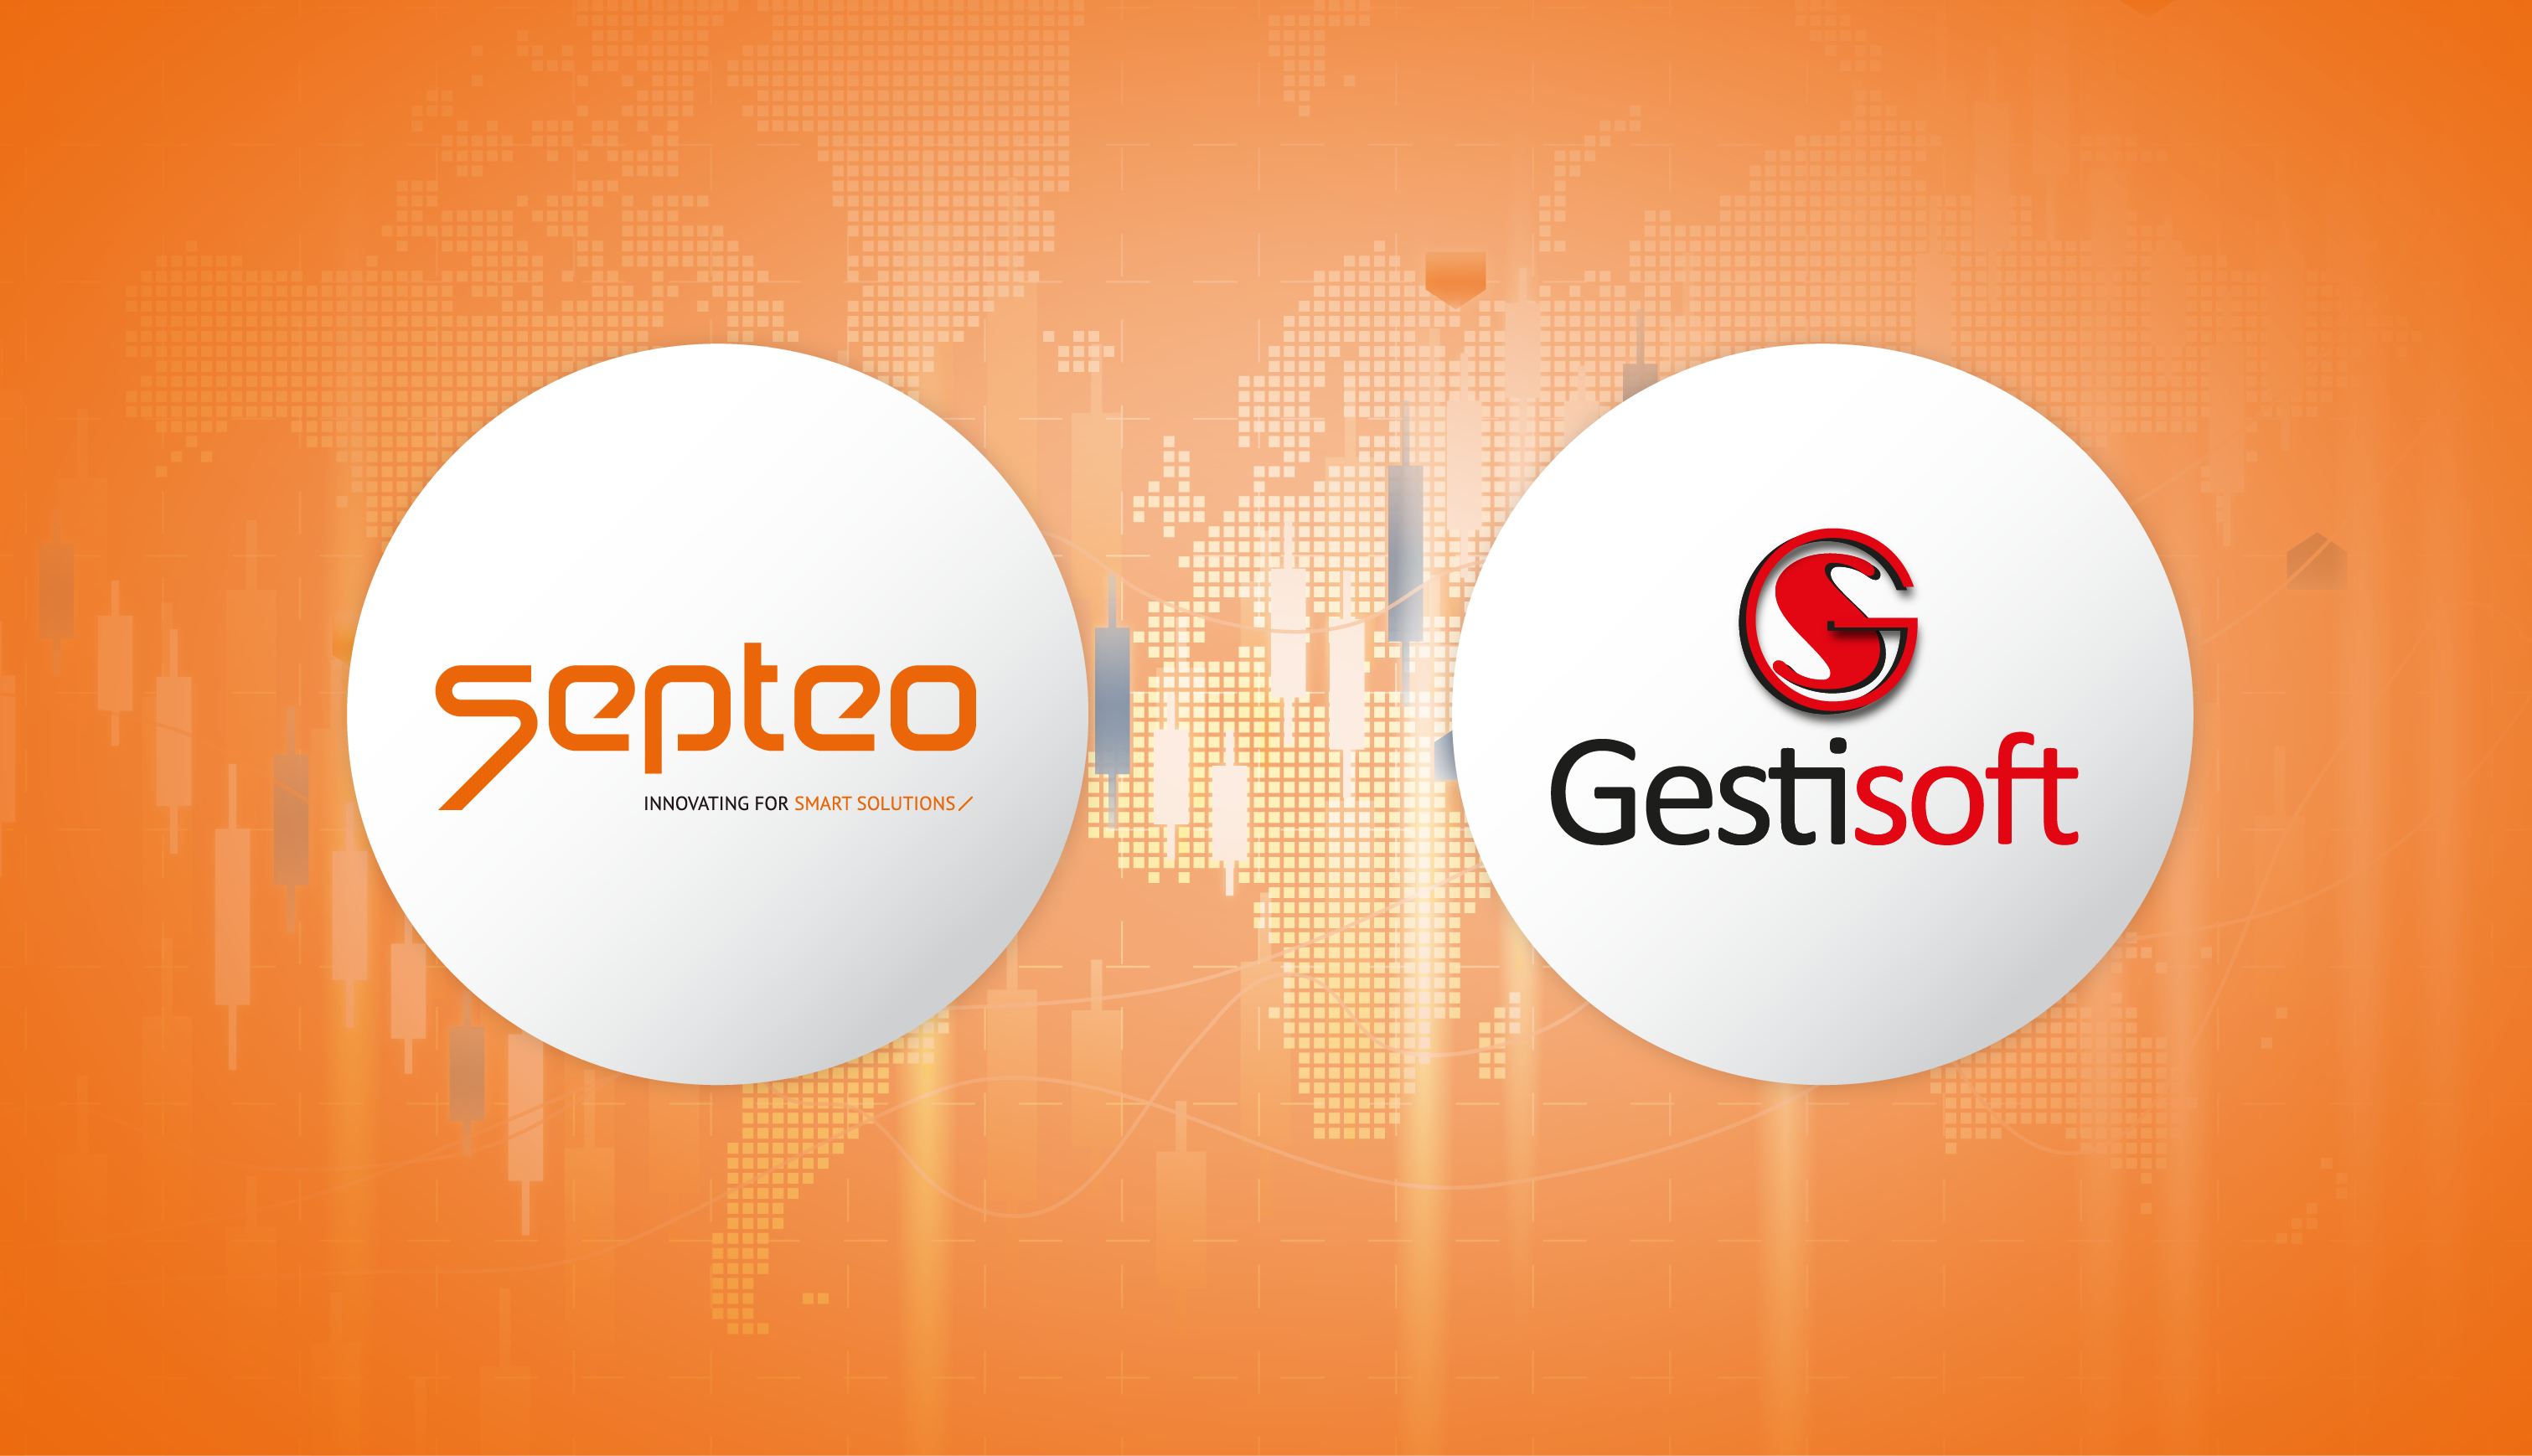 The Septeo Group, through its subsidiary Secib, has acquired Gestisoft, 1st bespoke management software for major law firms.